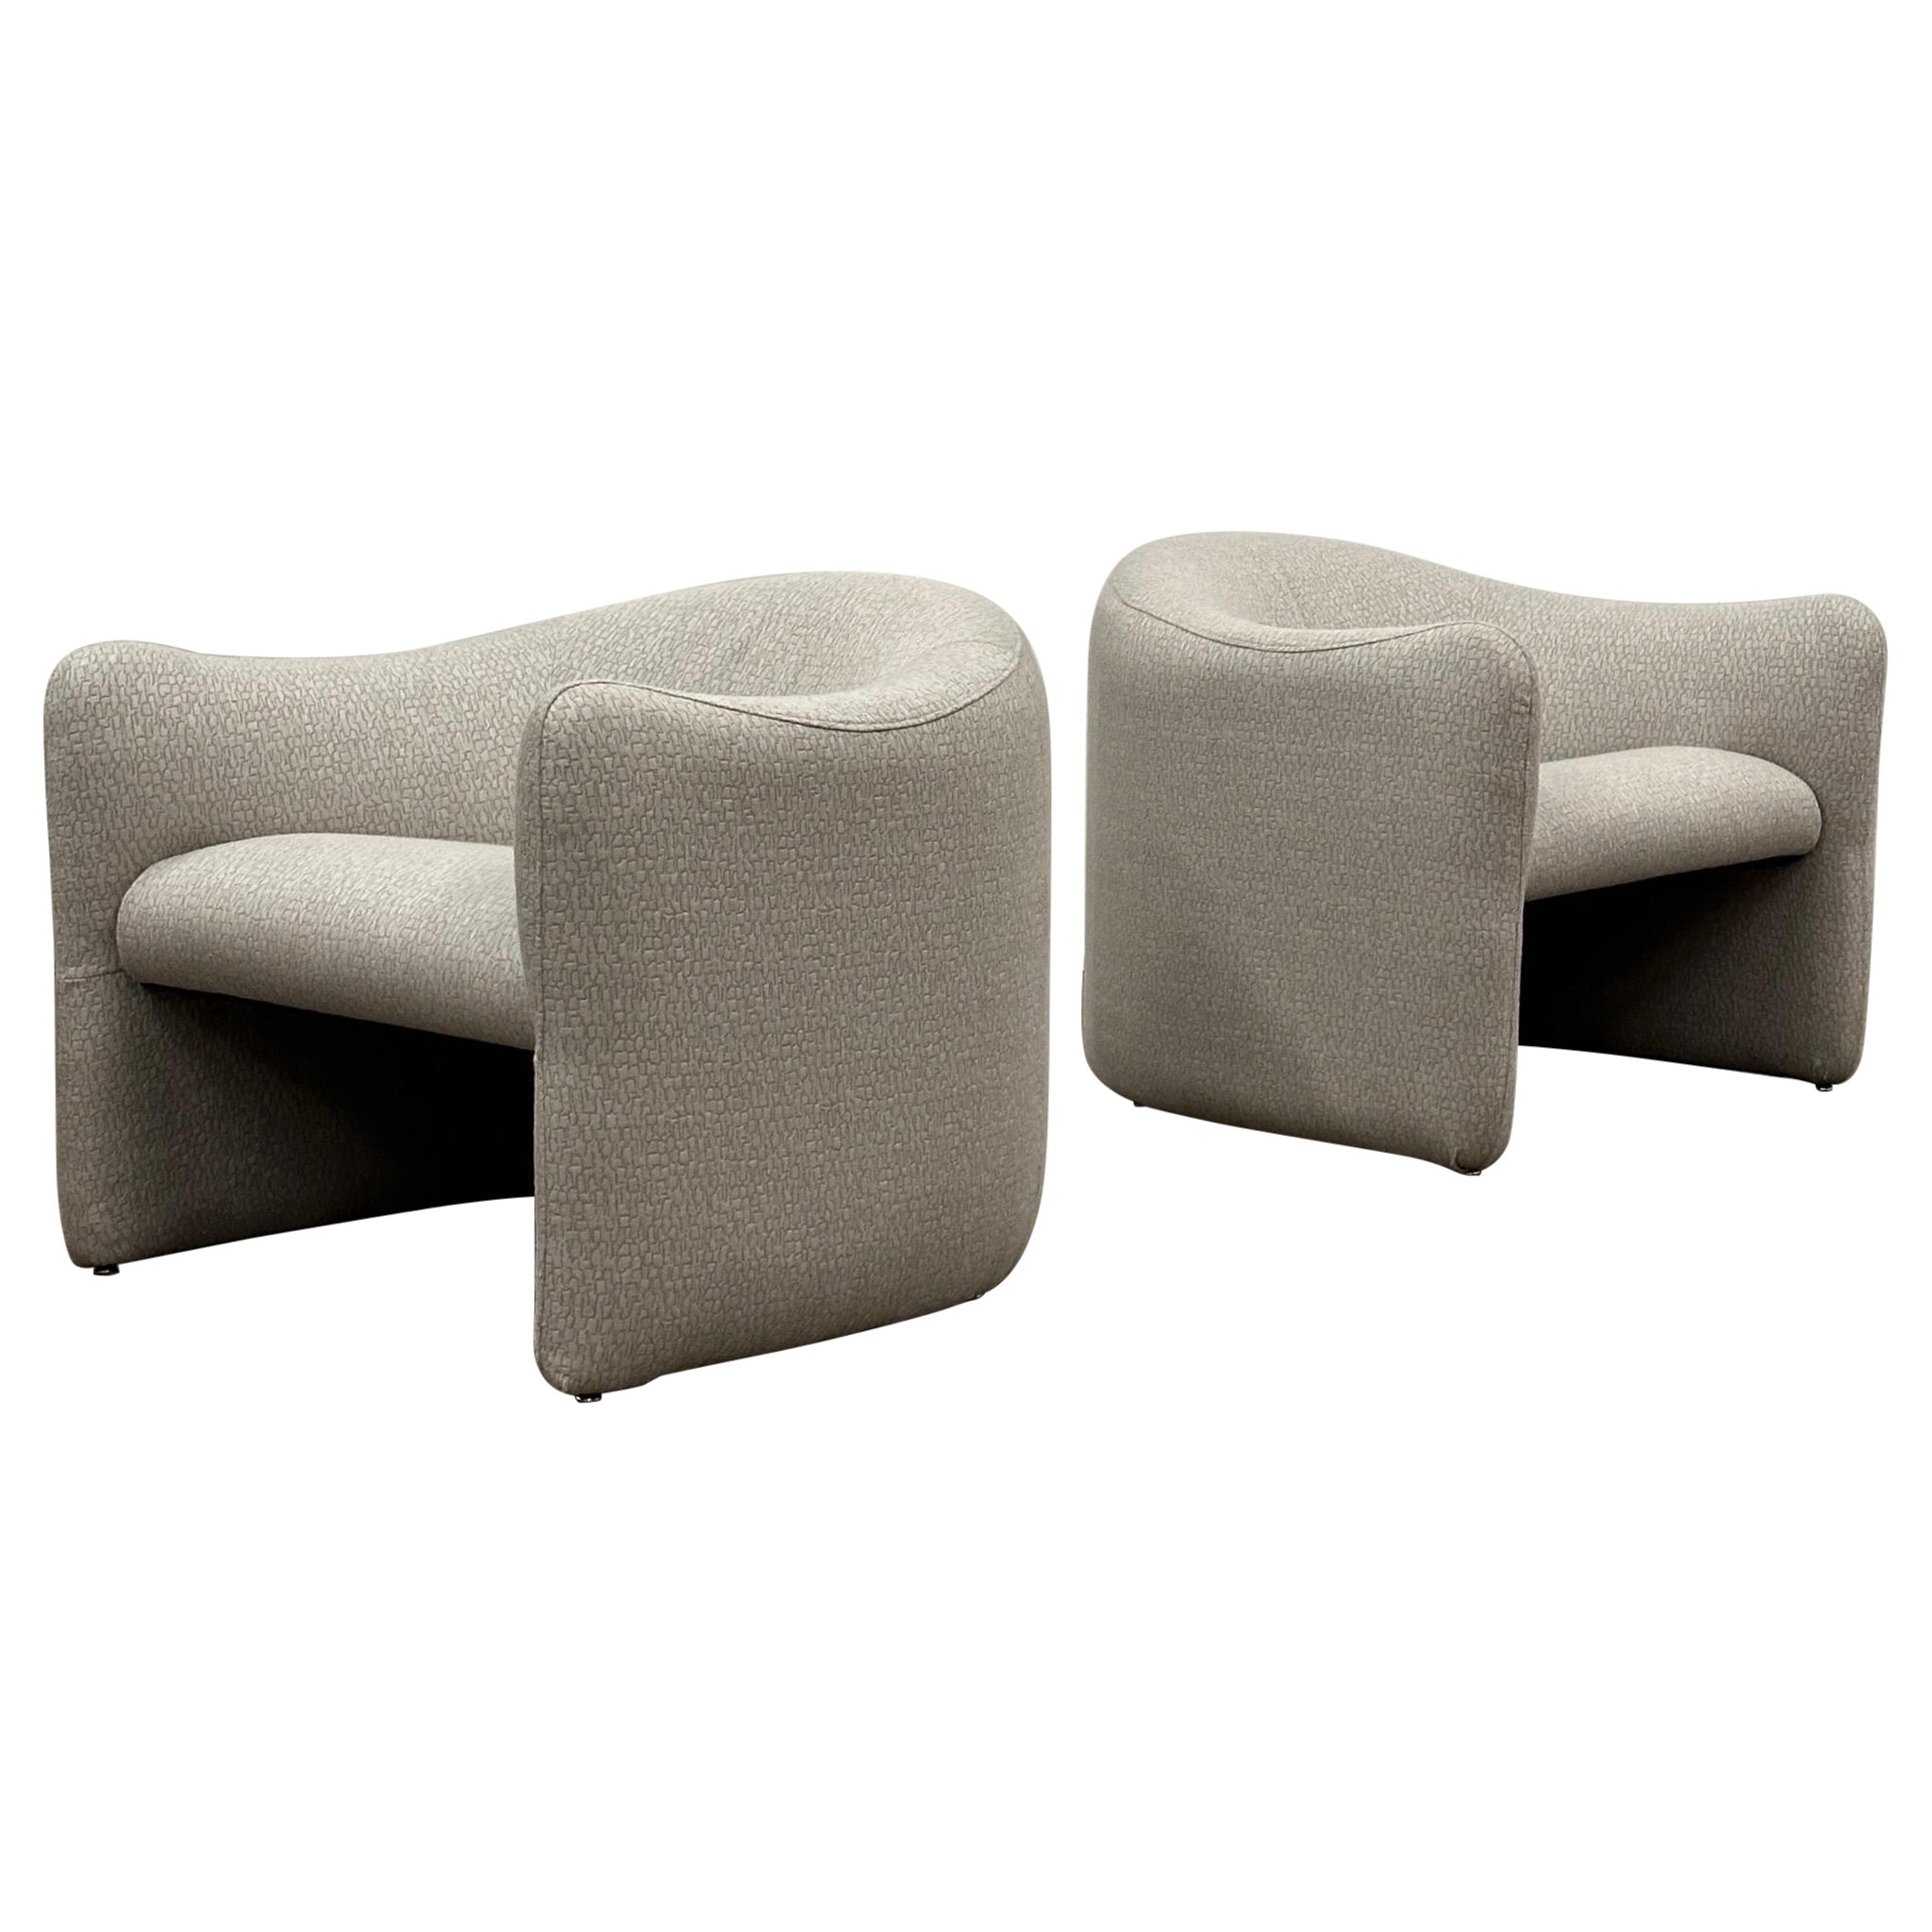 Chubby Lounge Chairs by Jules Heumann for Metropolitan For Sale